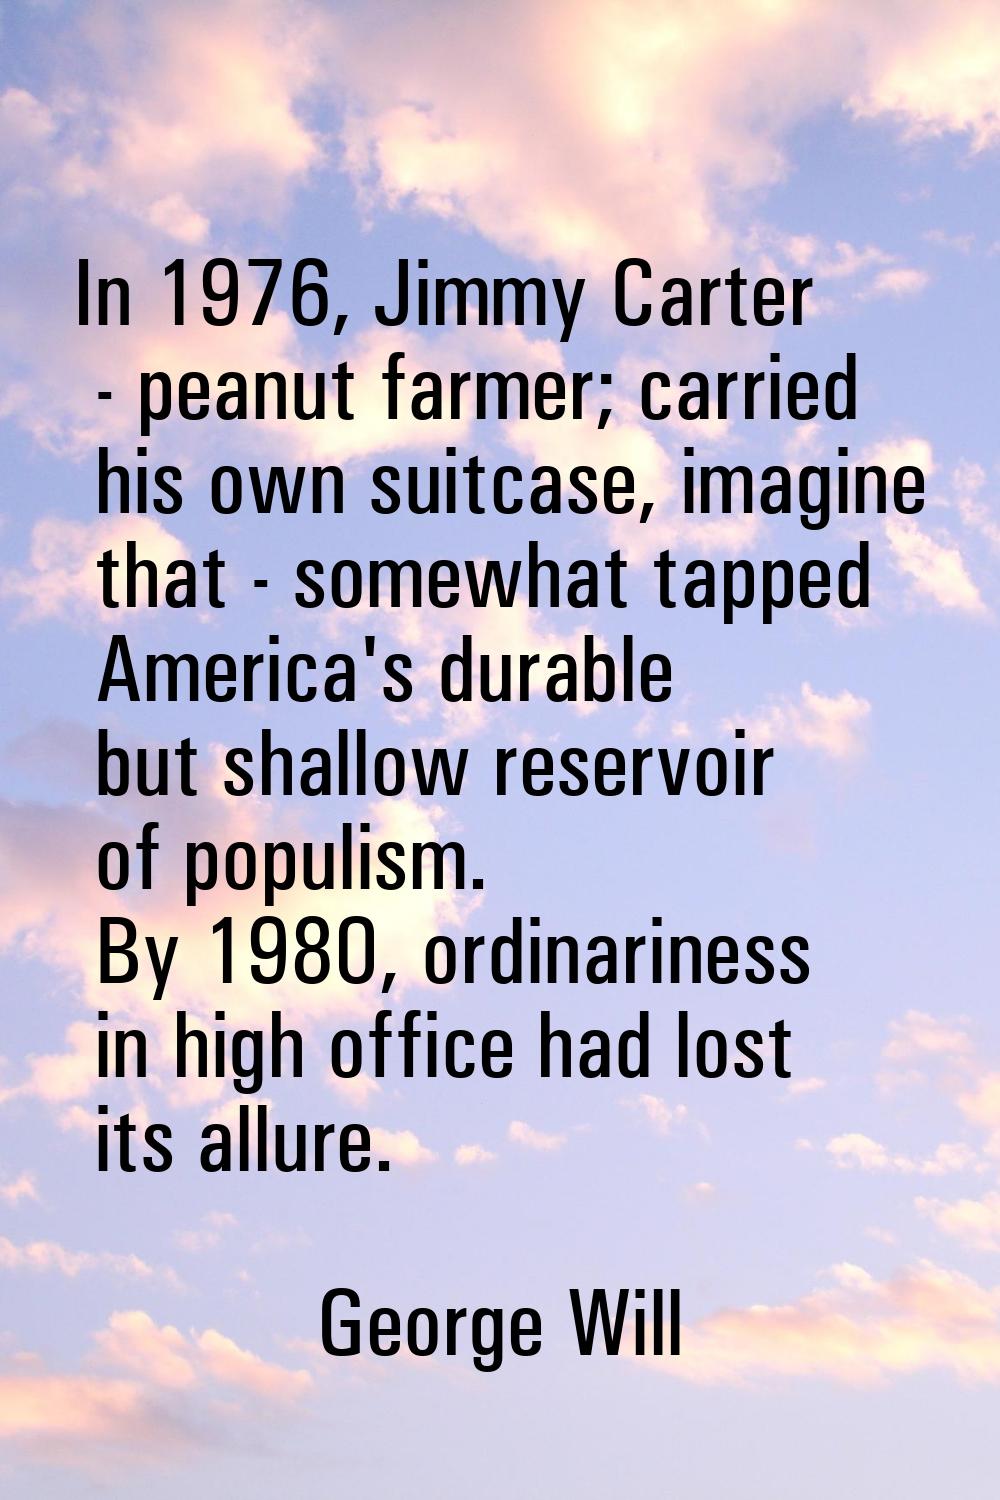 In 1976, Jimmy Carter - peanut farmer; carried his own suitcase, imagine that - somewhat tapped Ame